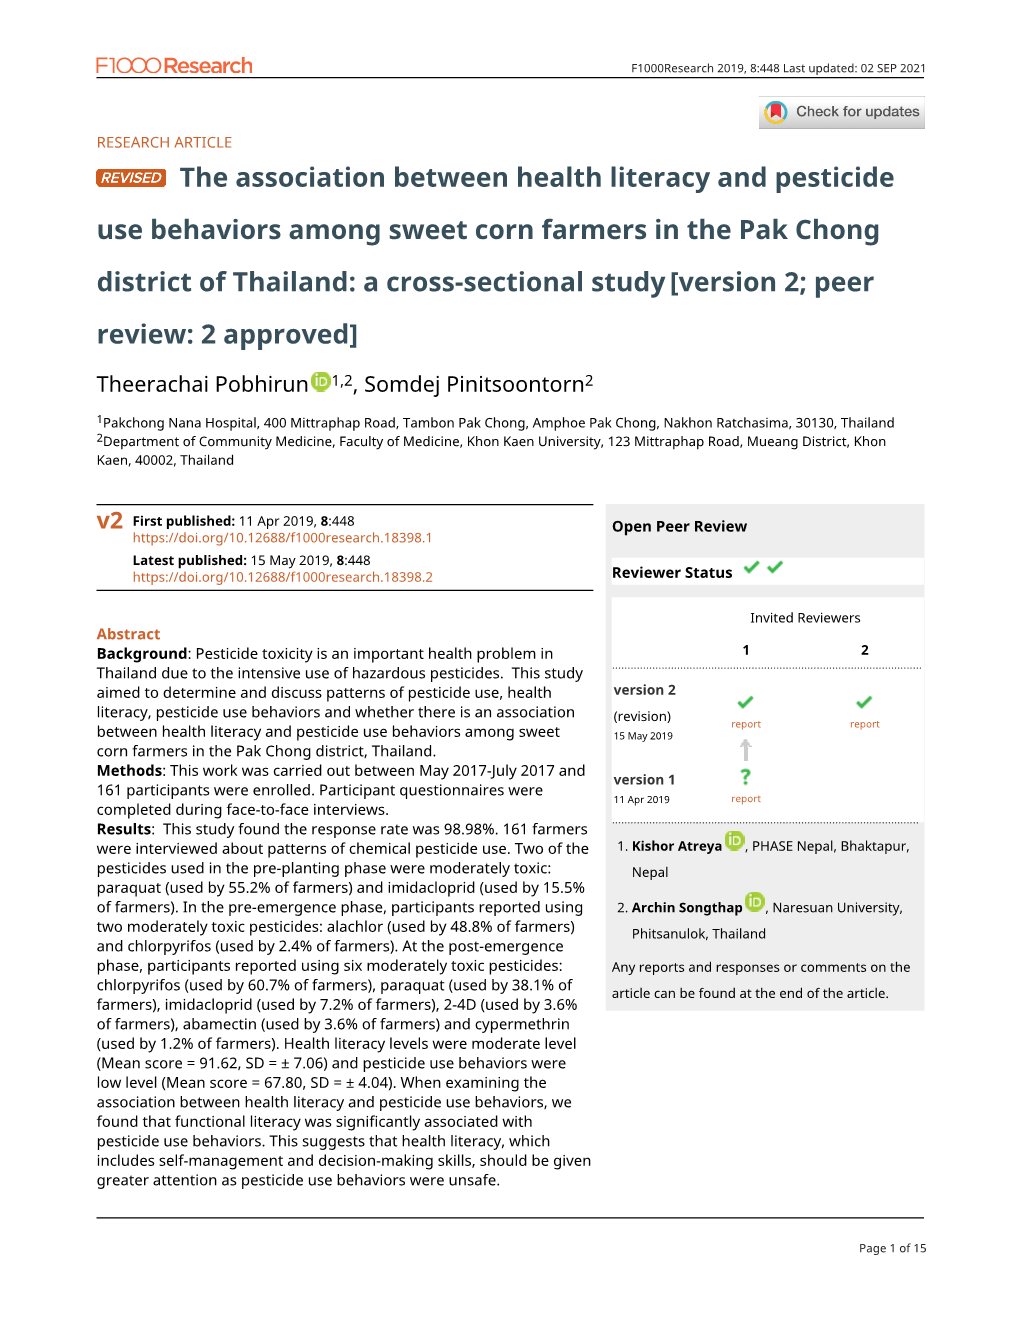 The Association Between Health Literacy And